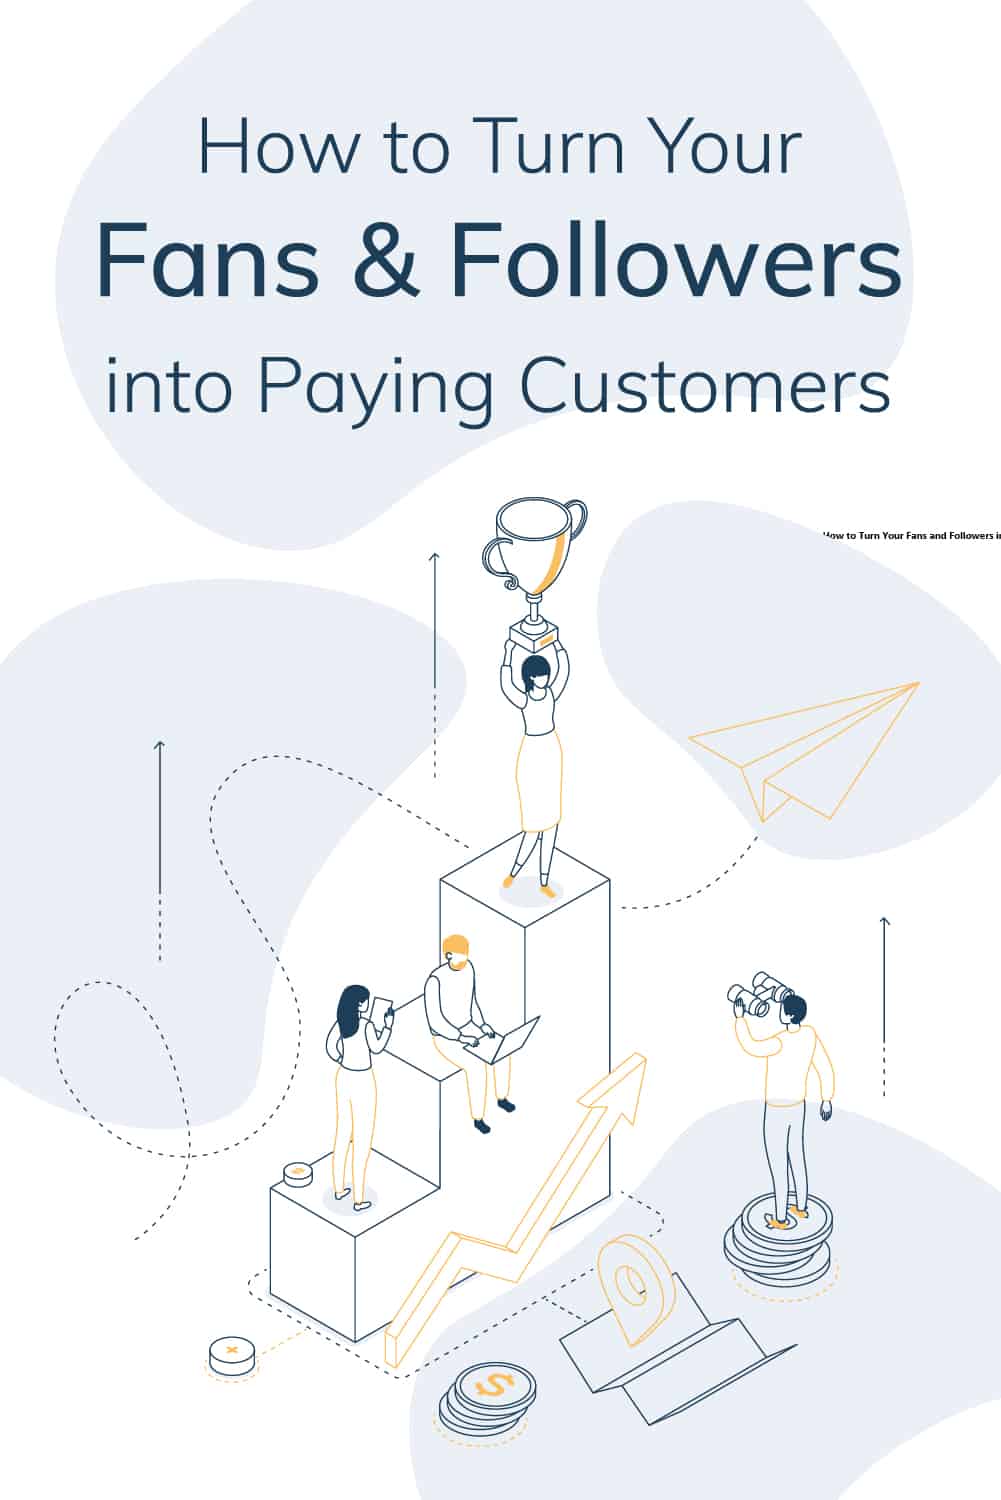 Unless those followers are paying you, they don’t mean much. Take those followers and turn them into paying customers. Here’s what to do. via @scopedesign